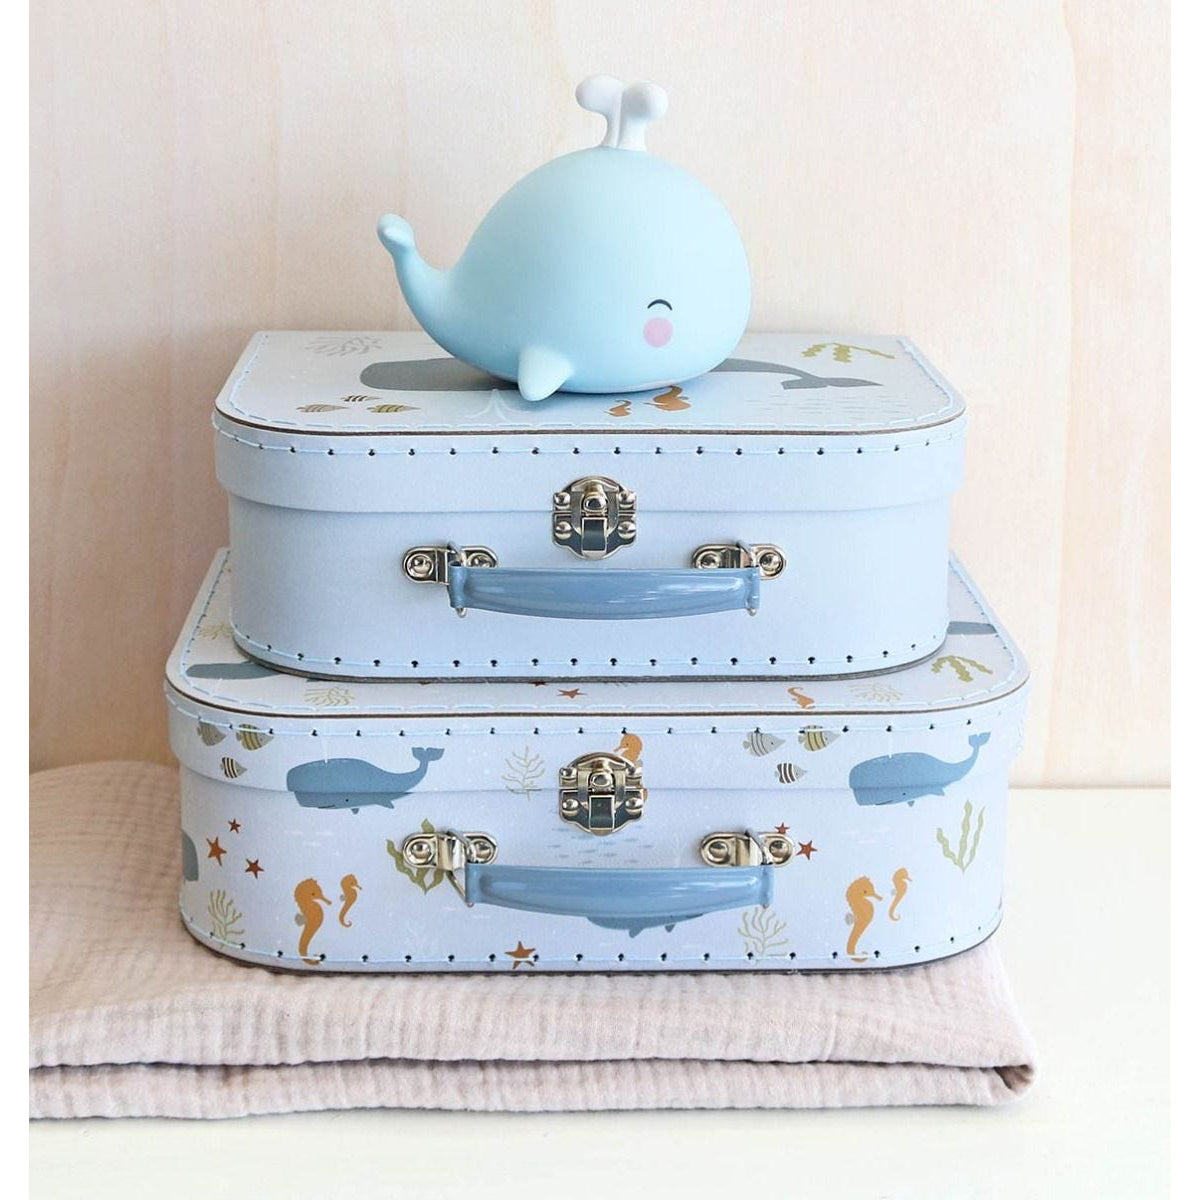 a-little-lovely-company-suitcase-set-ocean- (7)